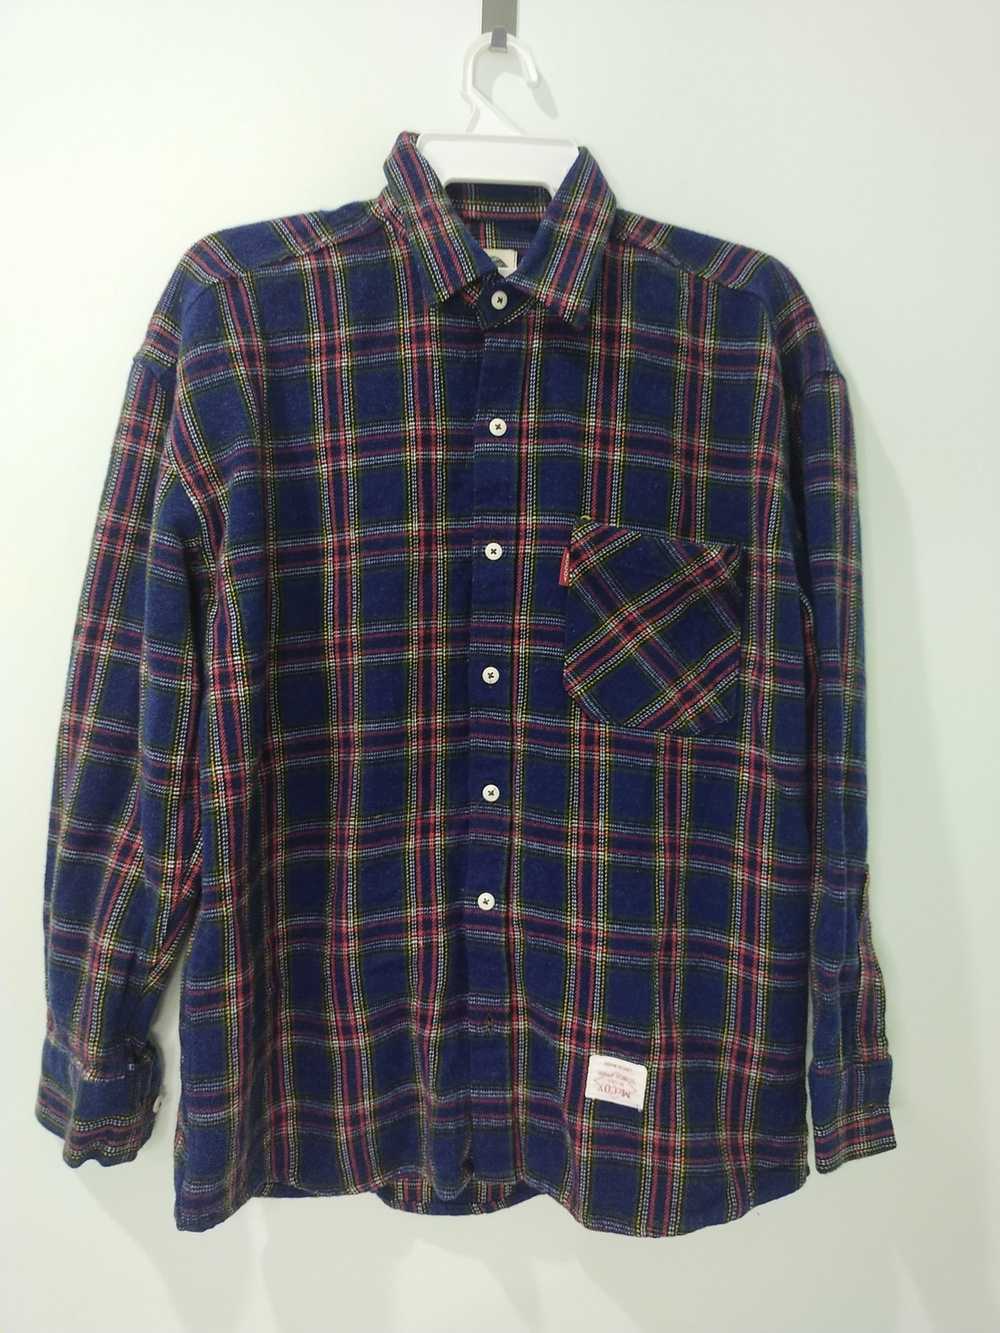 Toys Mccoy McCoy by Gill flannel shirt - image 1